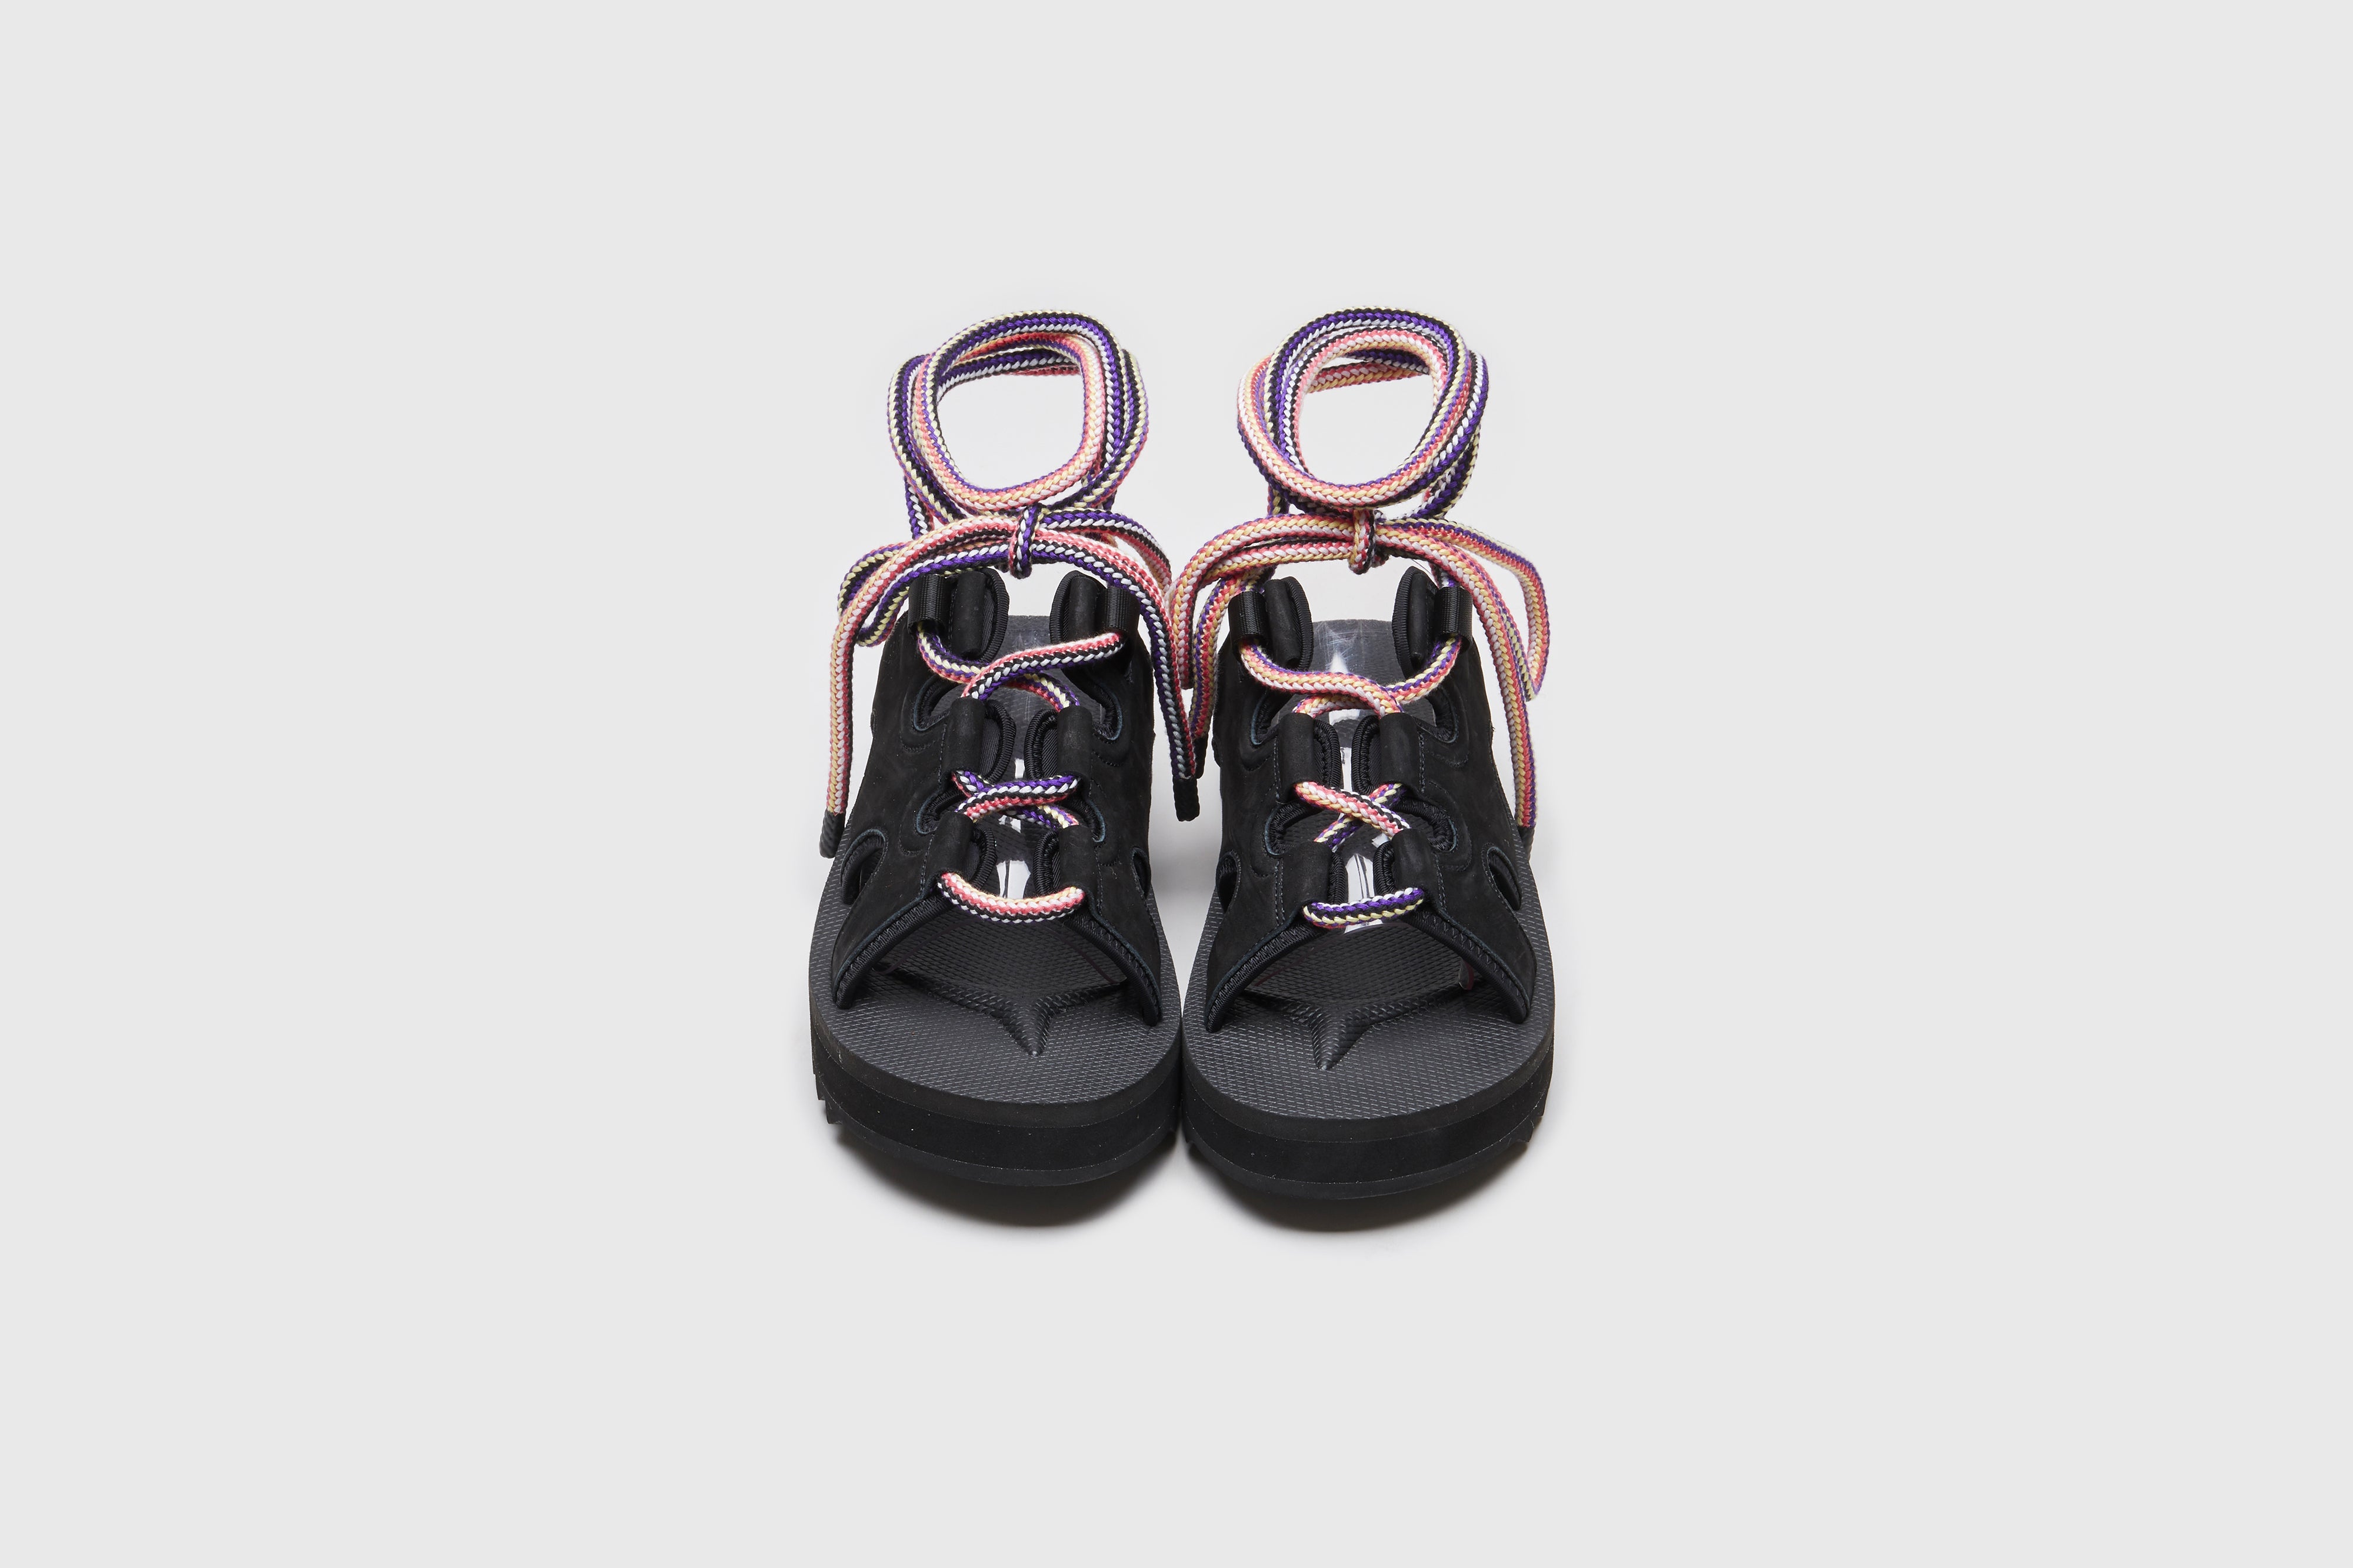 SUICOKE RAY-AB slides with black nylon upper, black midsole and sole, strap and logo patch. From Spring/Summer 2023 collection on eightywingold Web Store, an official partner of SUICOKE. OG-326AB BLACK